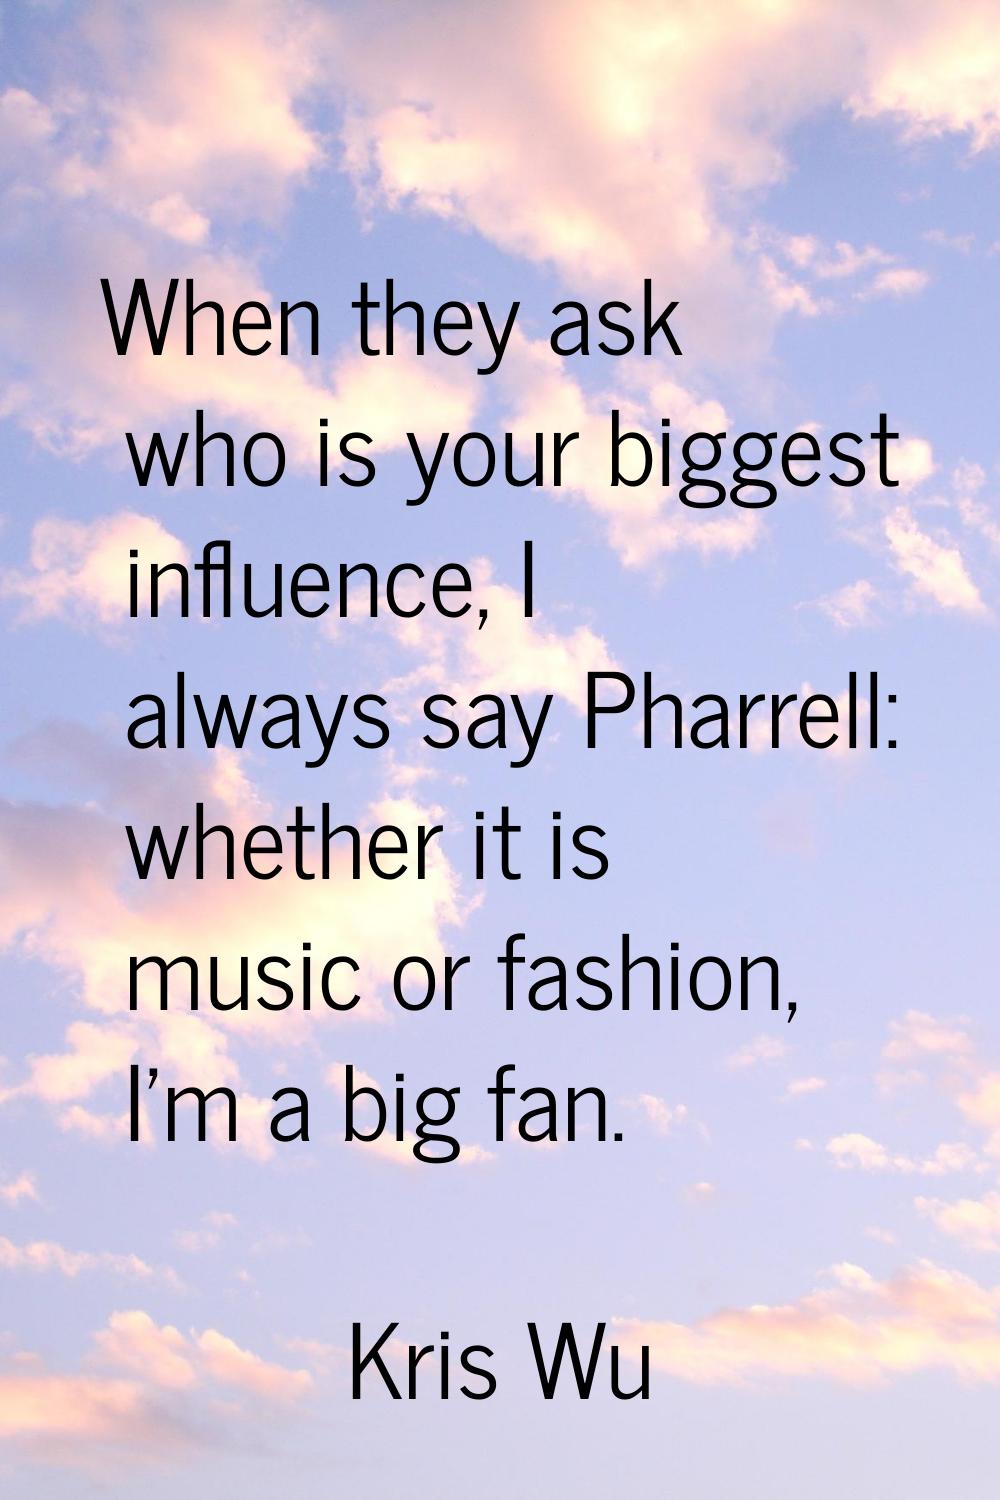 When they ask who is your biggest influence, I always say Pharrell: whether it is music or fashion,